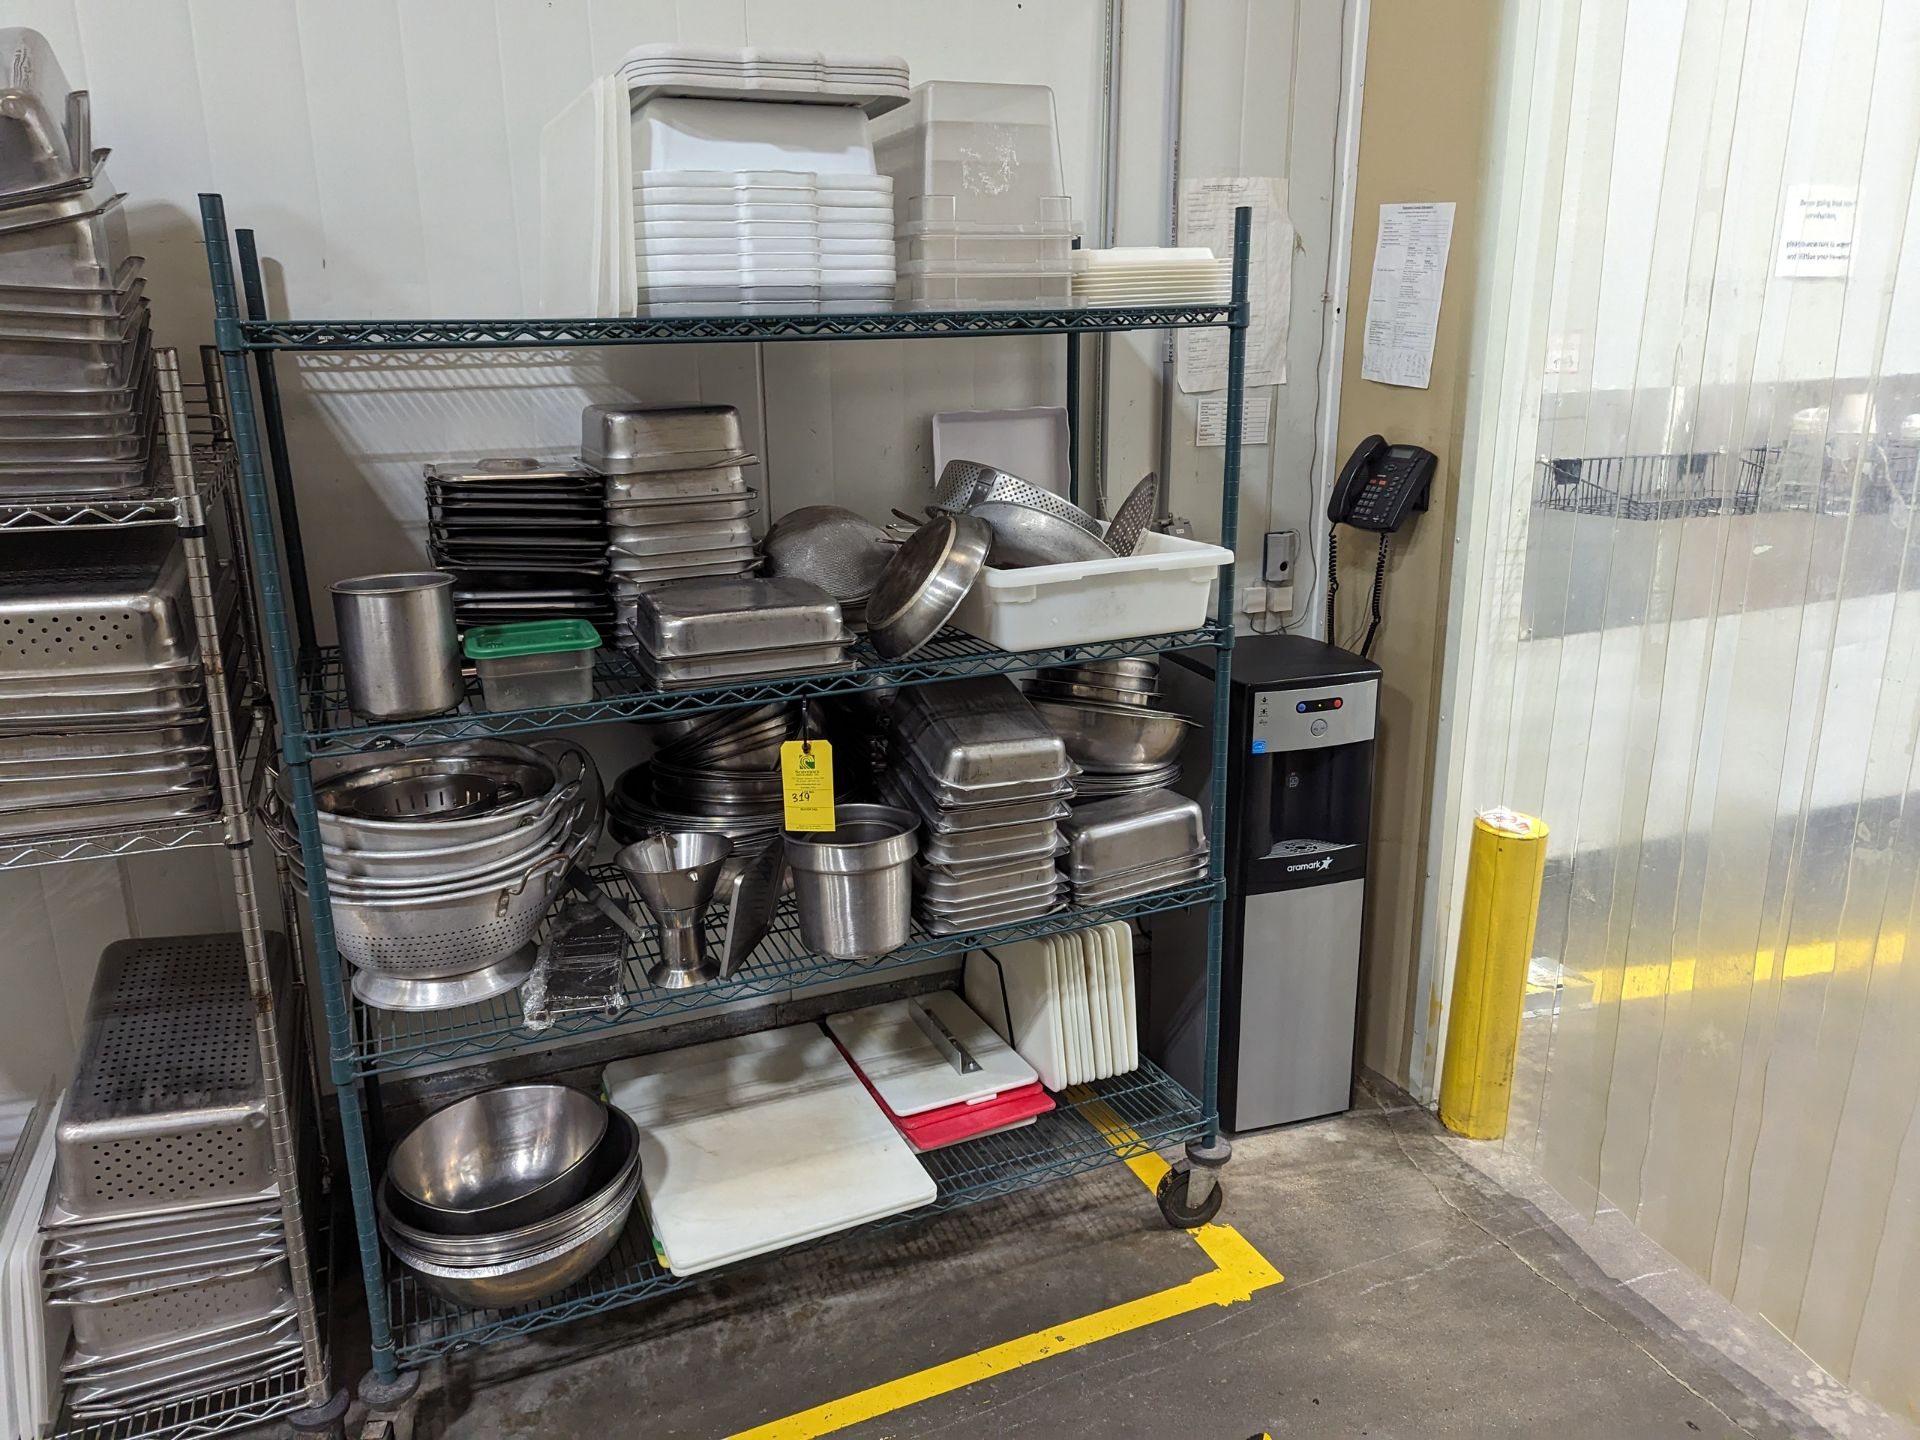 Lot of Cookware including Storage Rack 60x24x75